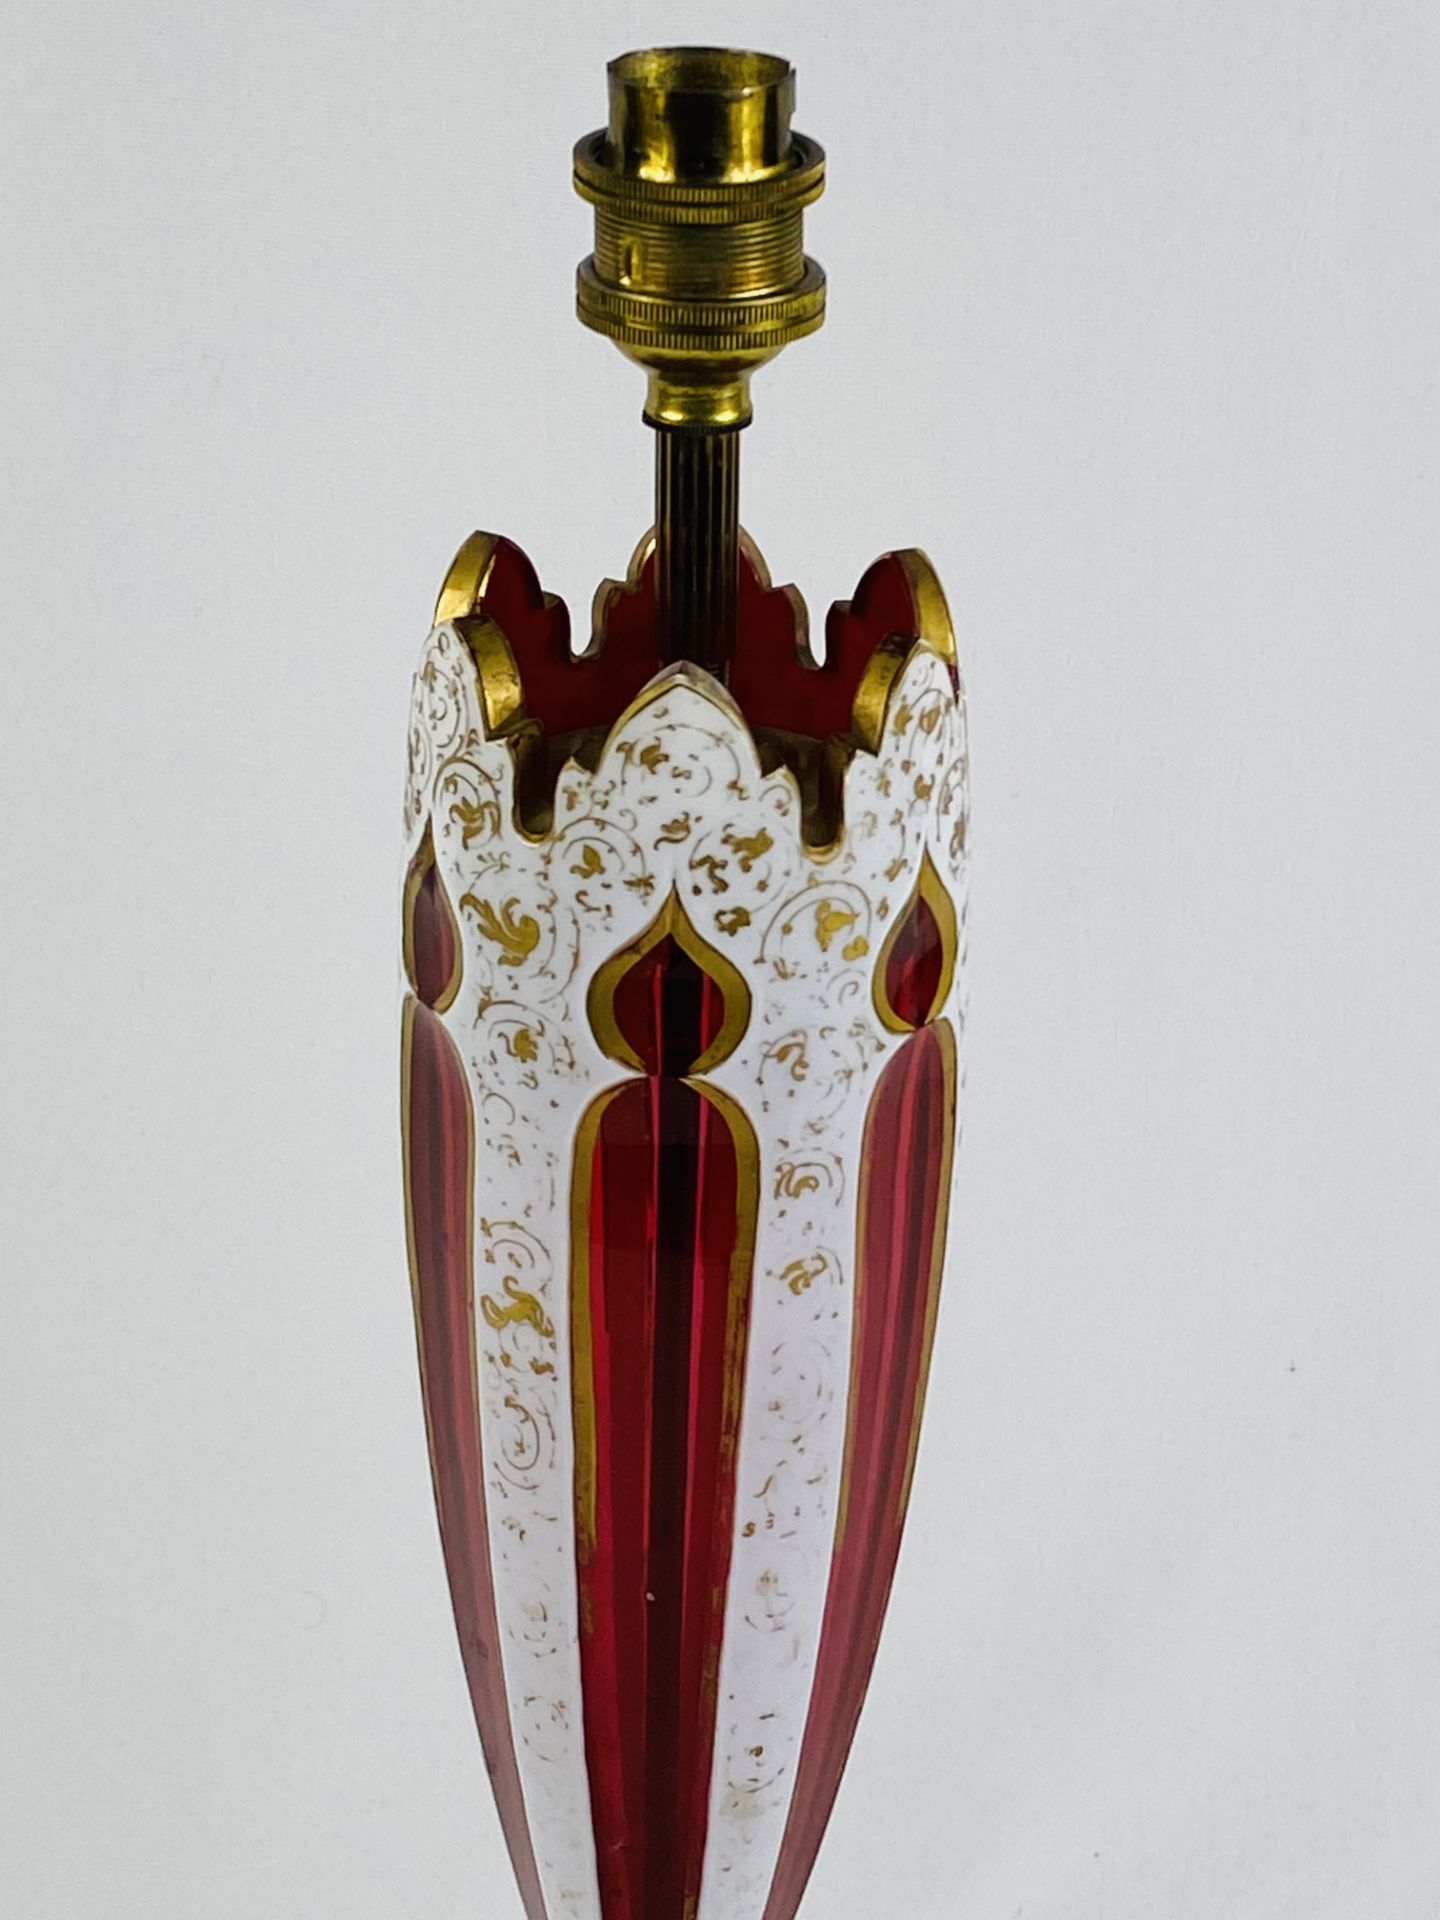 Bohemian glass table lamp with gilt decoration - Image 3 of 4